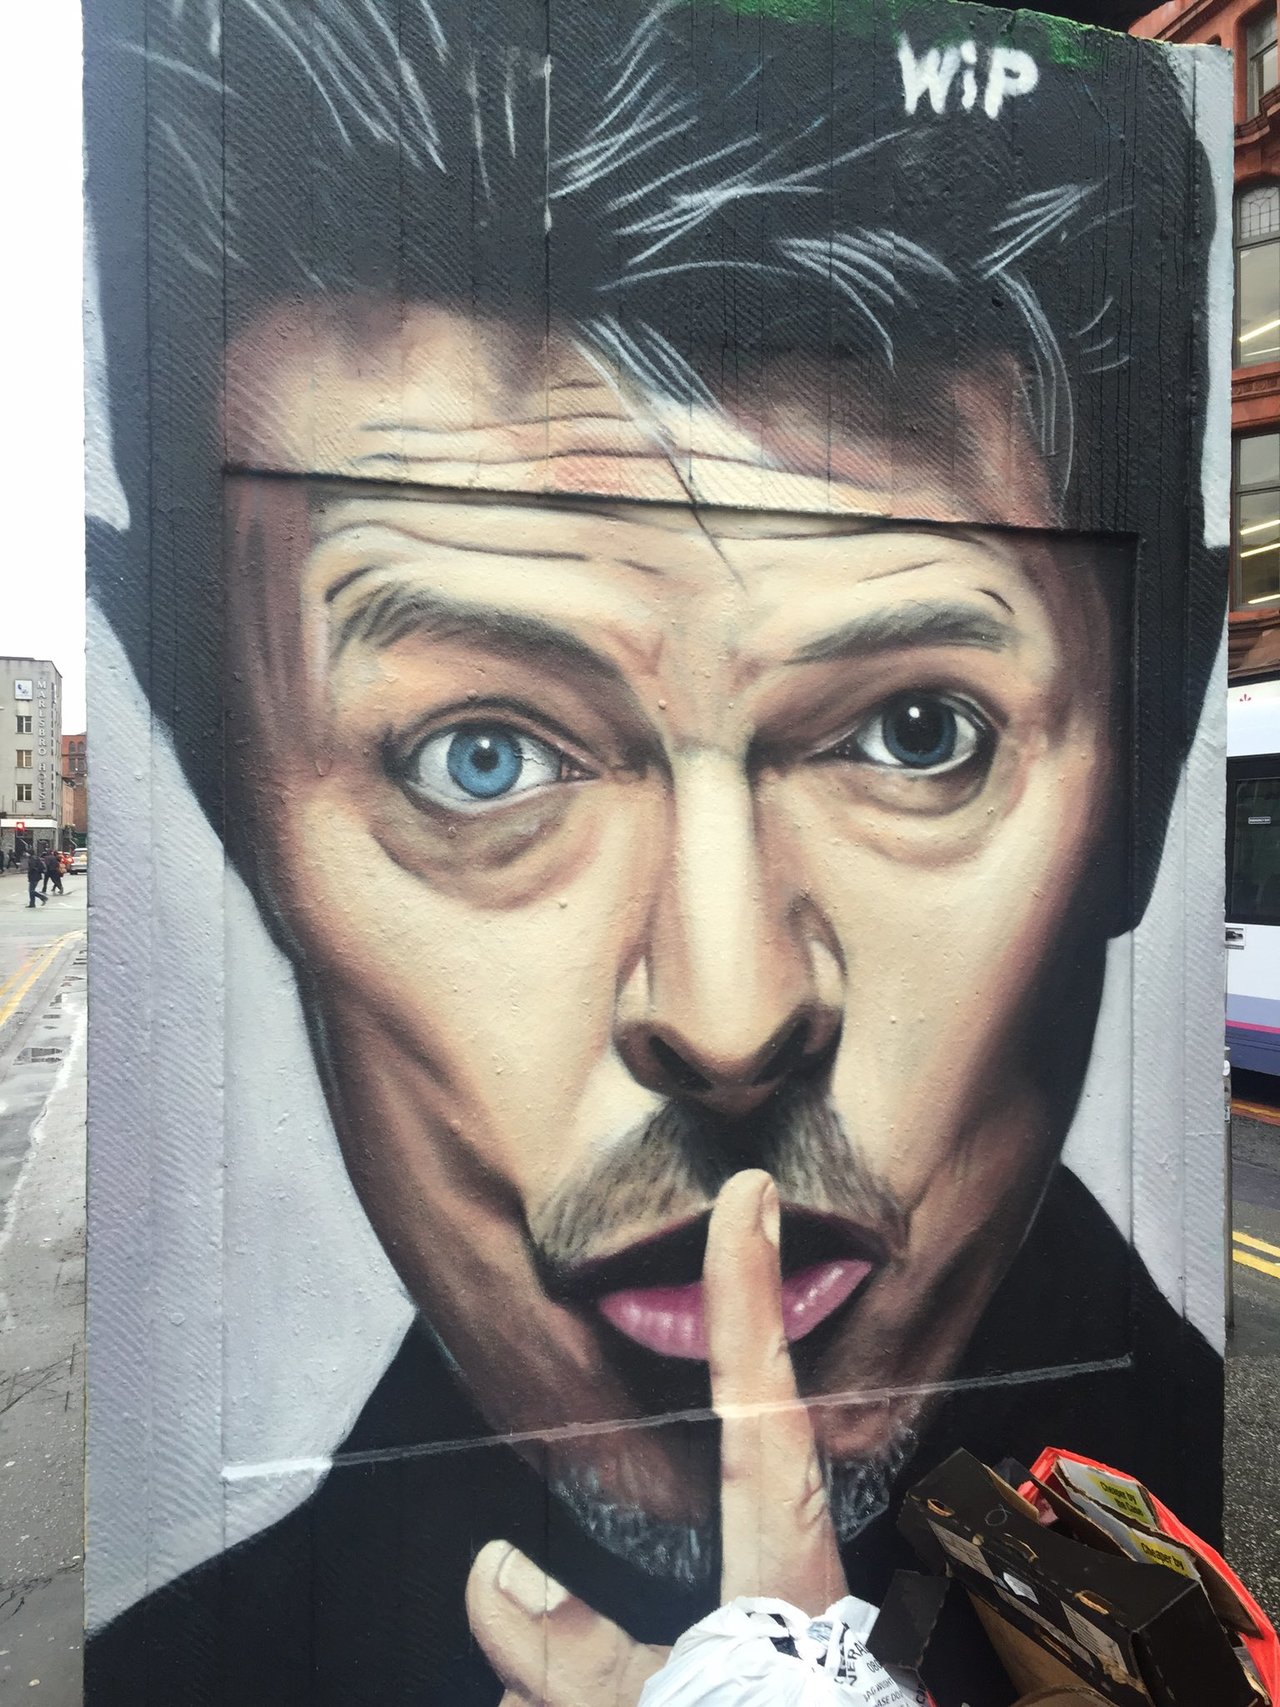 WiP David Bowie mural in Stevenson Square, Manchester created by #akse #Manchester #streetart #graffiti https://t.co/qOQS6jutuS